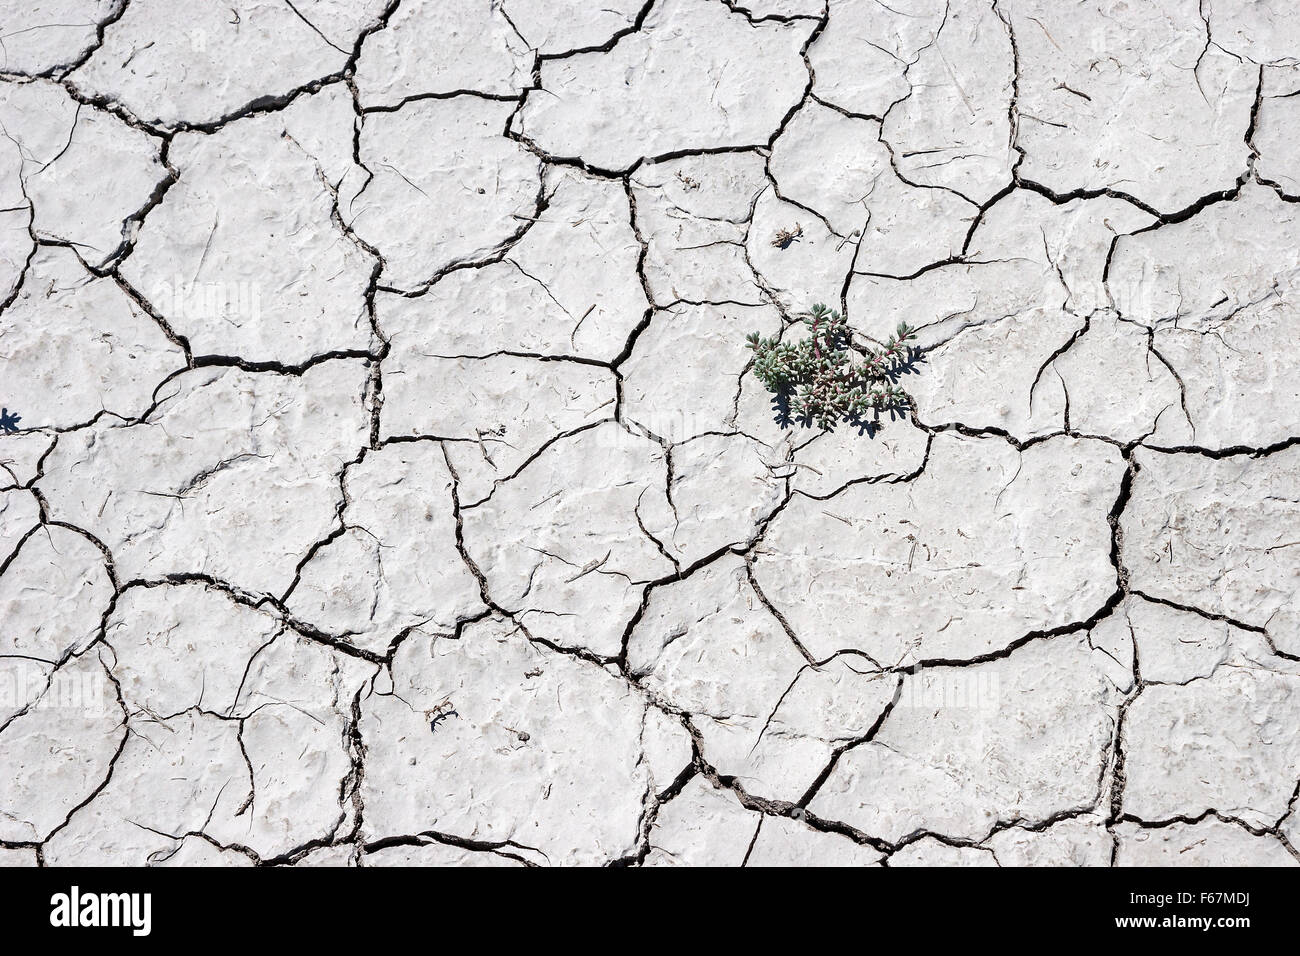 Plant growing through dry cracks in ground, dry clay surface, Caineville, Utah, United States Stock Photo